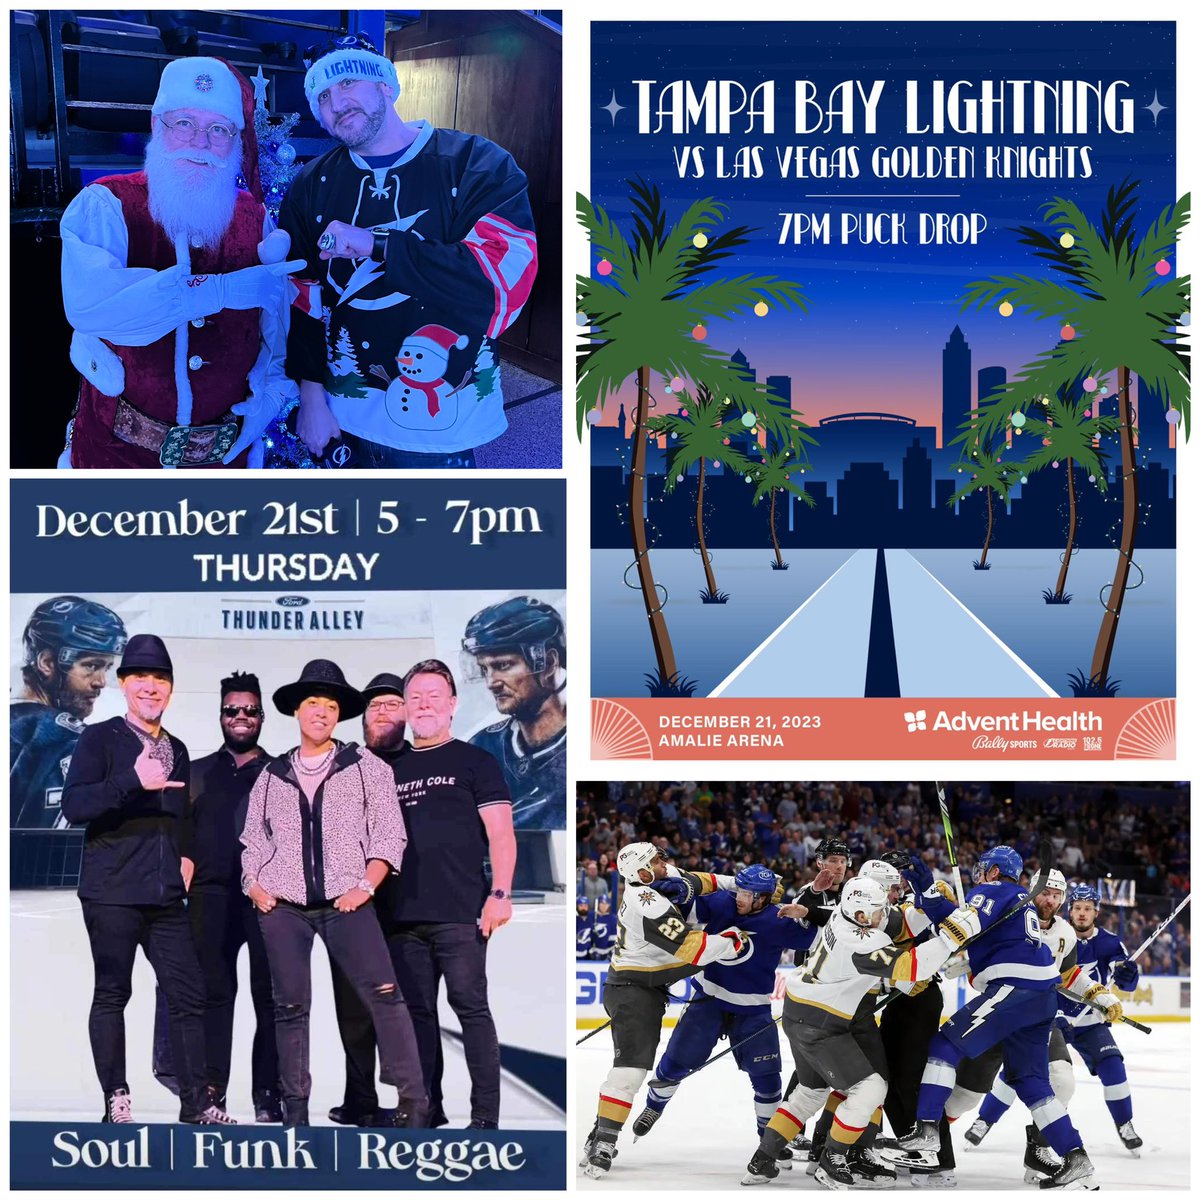 Rise & Grind, #BoltsNation⚡️
It’s #GameDay & Holiday Celebration! 
See you TONIGHT at @AmalieArena as our @TBLightning looking for back-to-back DUBS as we battle @StanleyCup Champas, @GoldenKnights at 7p! Phoenix5 on @ford Thunder Alley pre-game! Lets spread some holiday cheers!